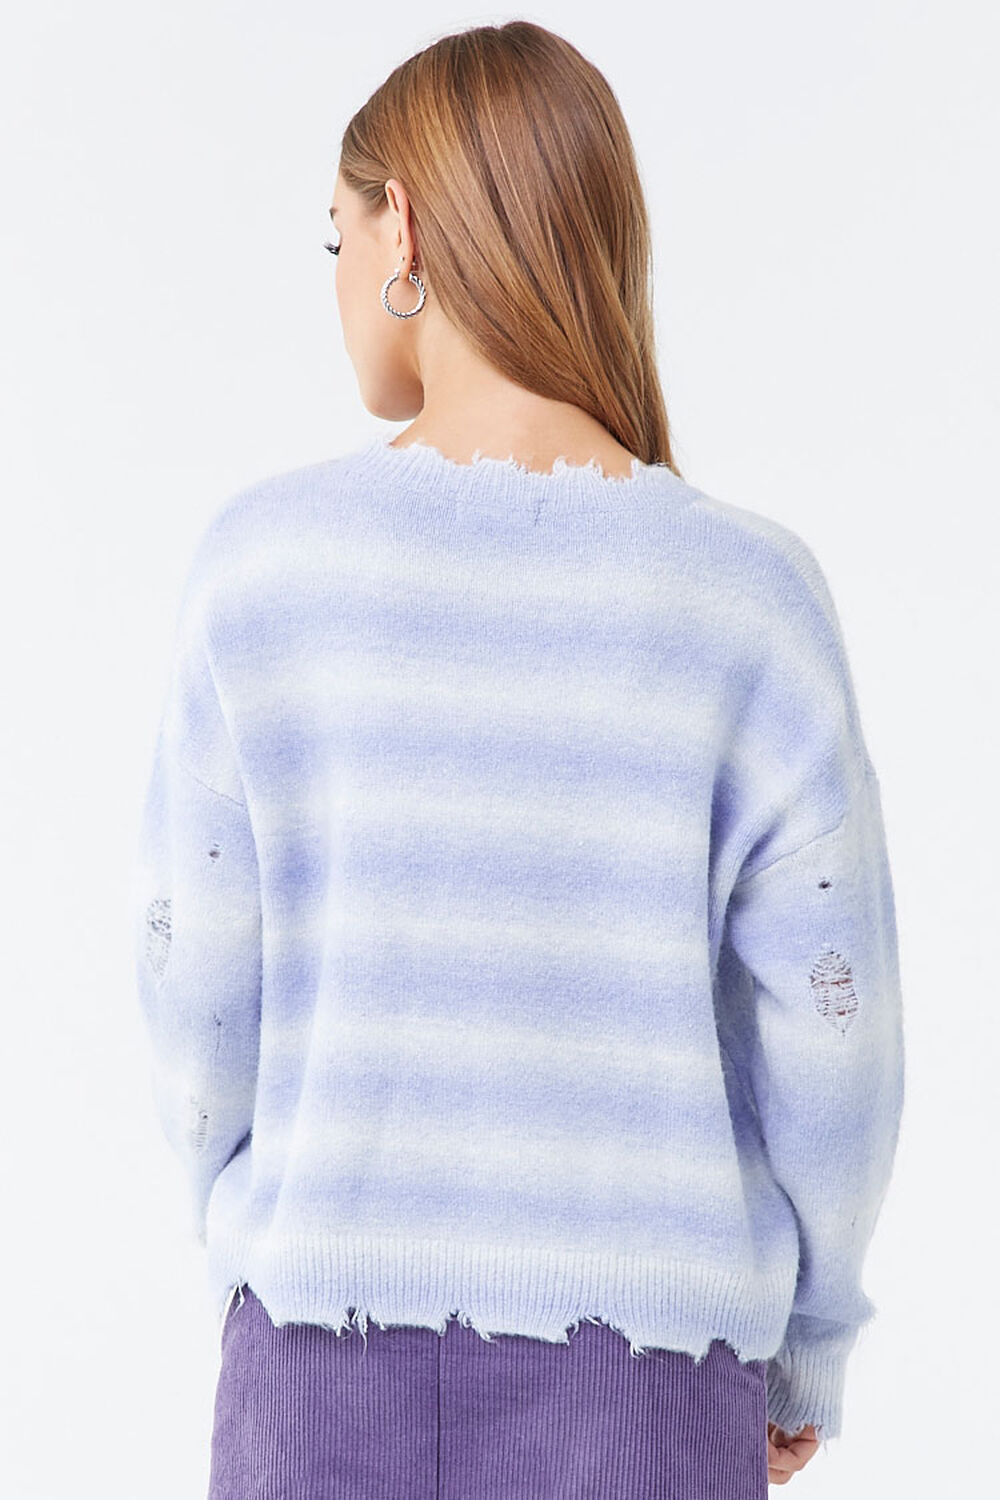 LAVENDER/CREAM Brushed Distressed Striped Sweater, image 3